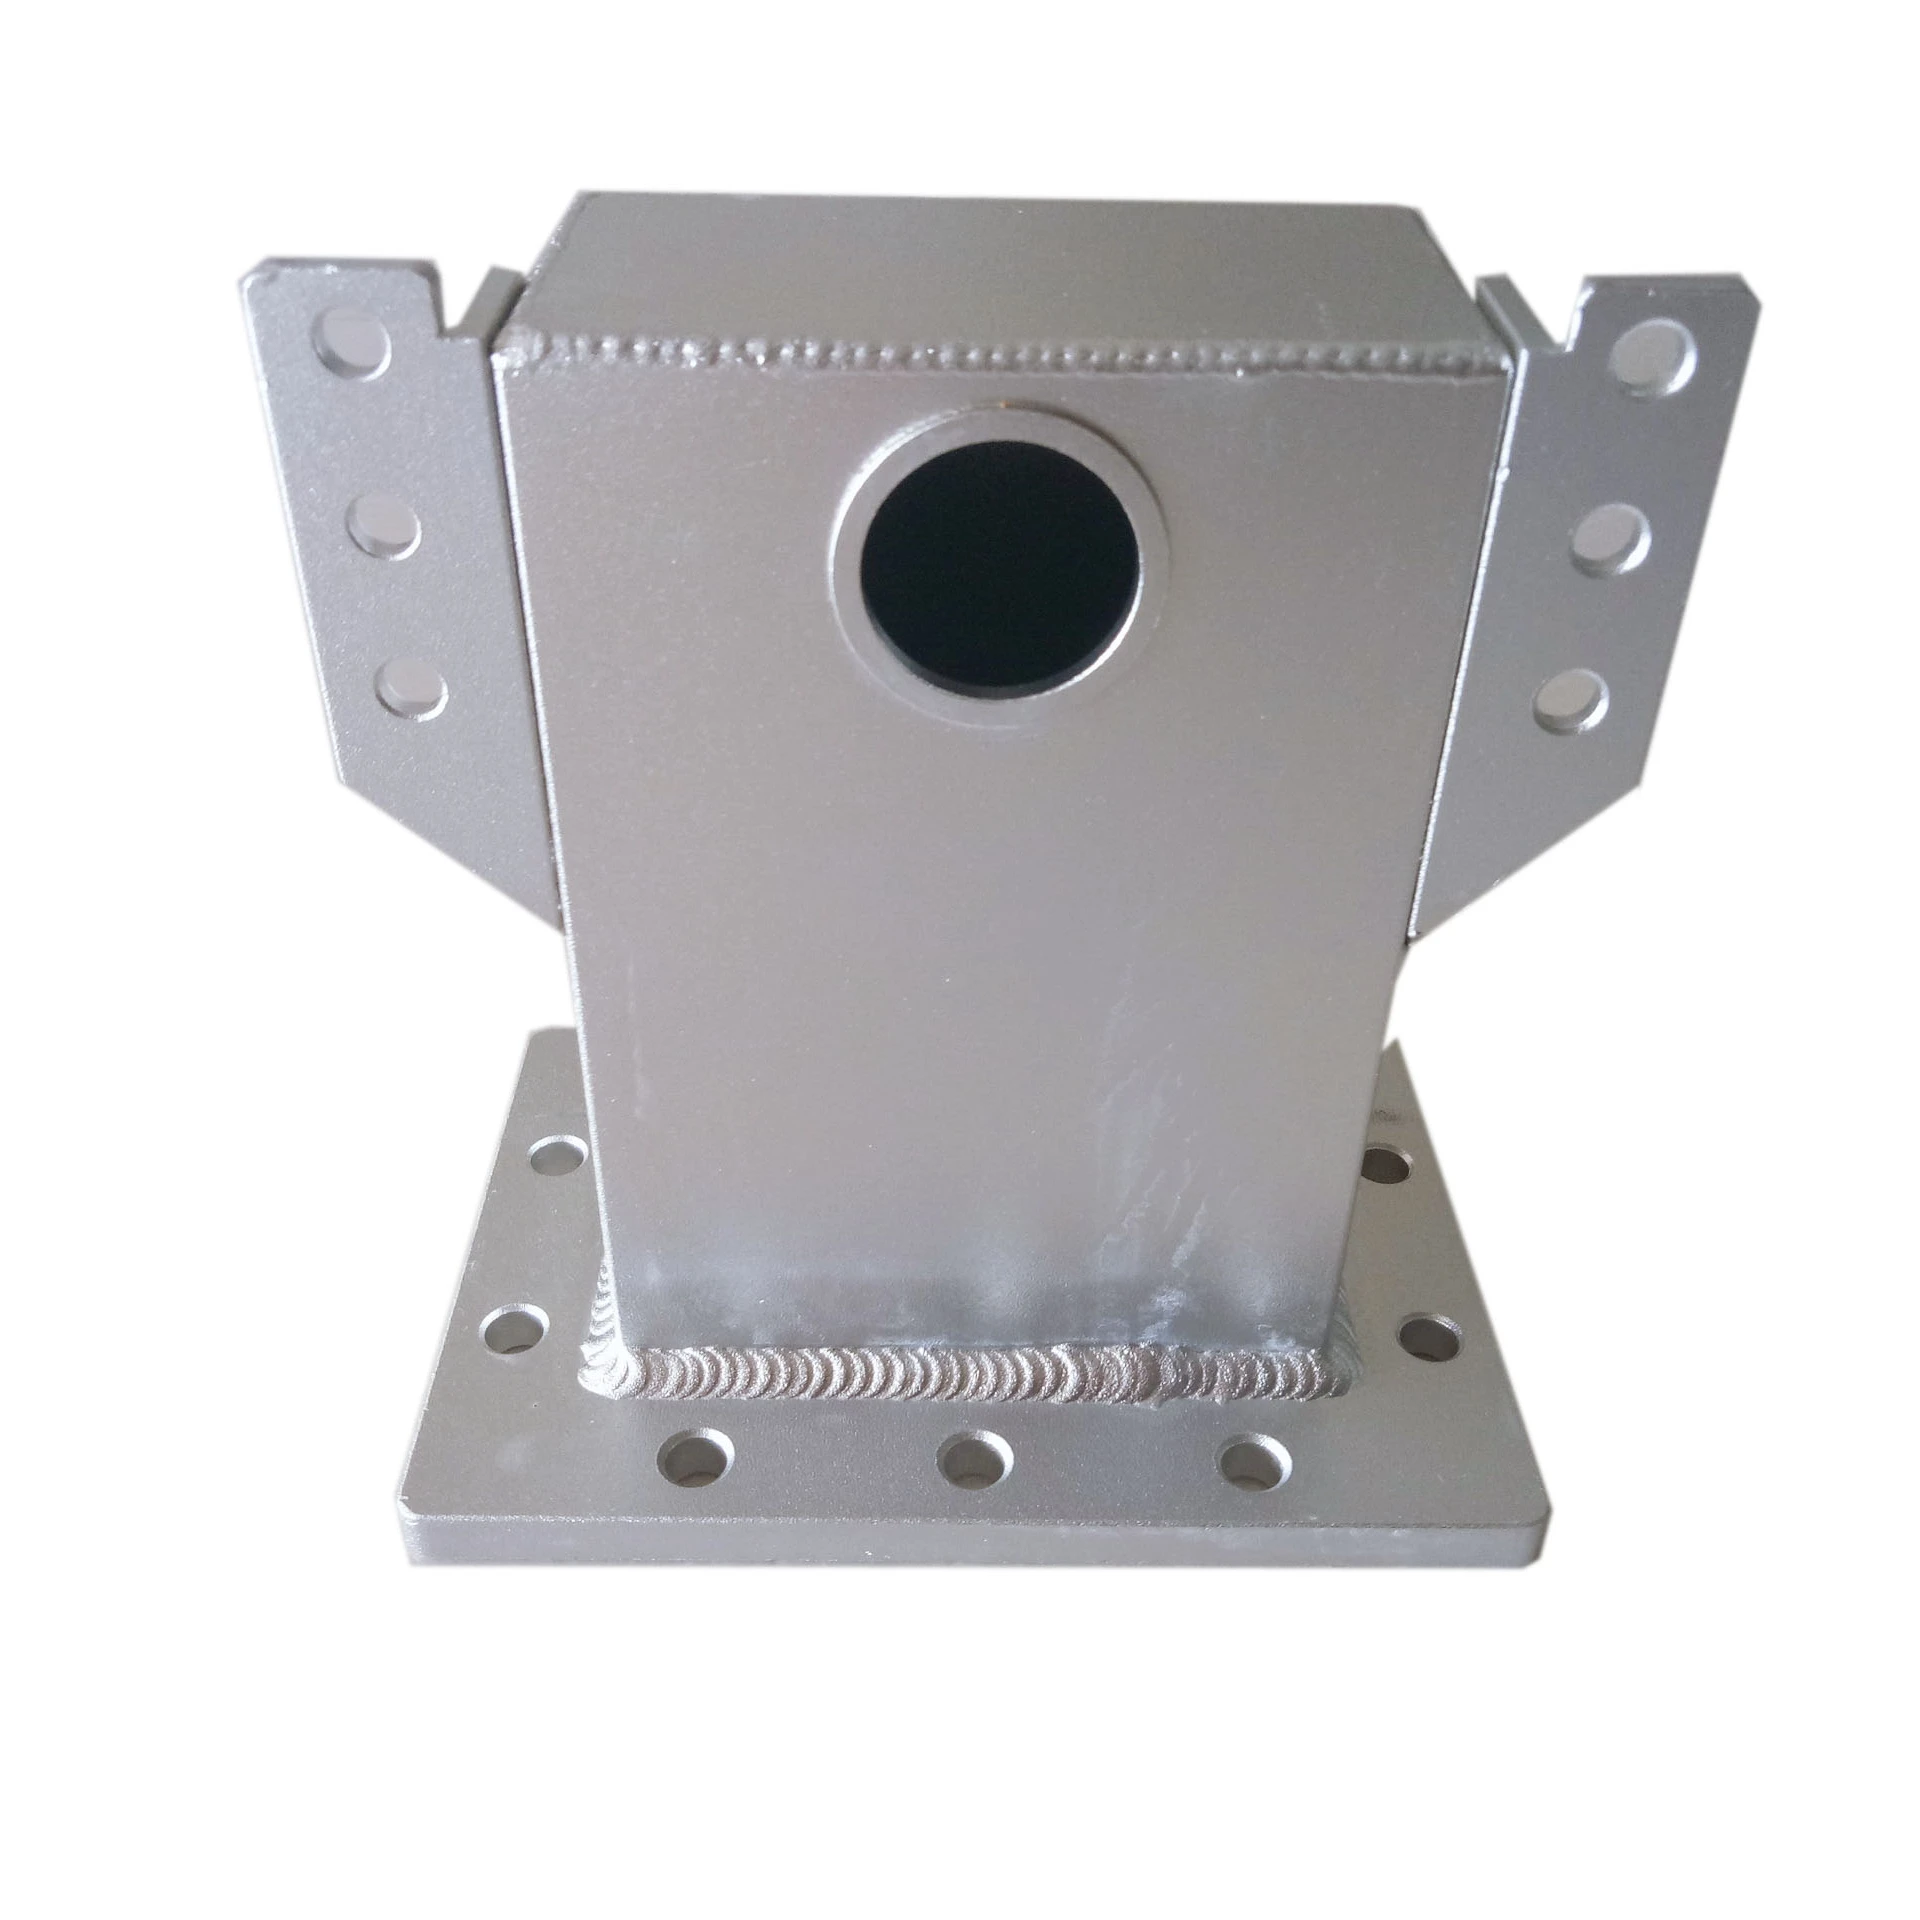 Wolk Duur deze Source 138mm*95mm*8mm rectangular microwave waveguide for magnetron use on  m.alibaba.com